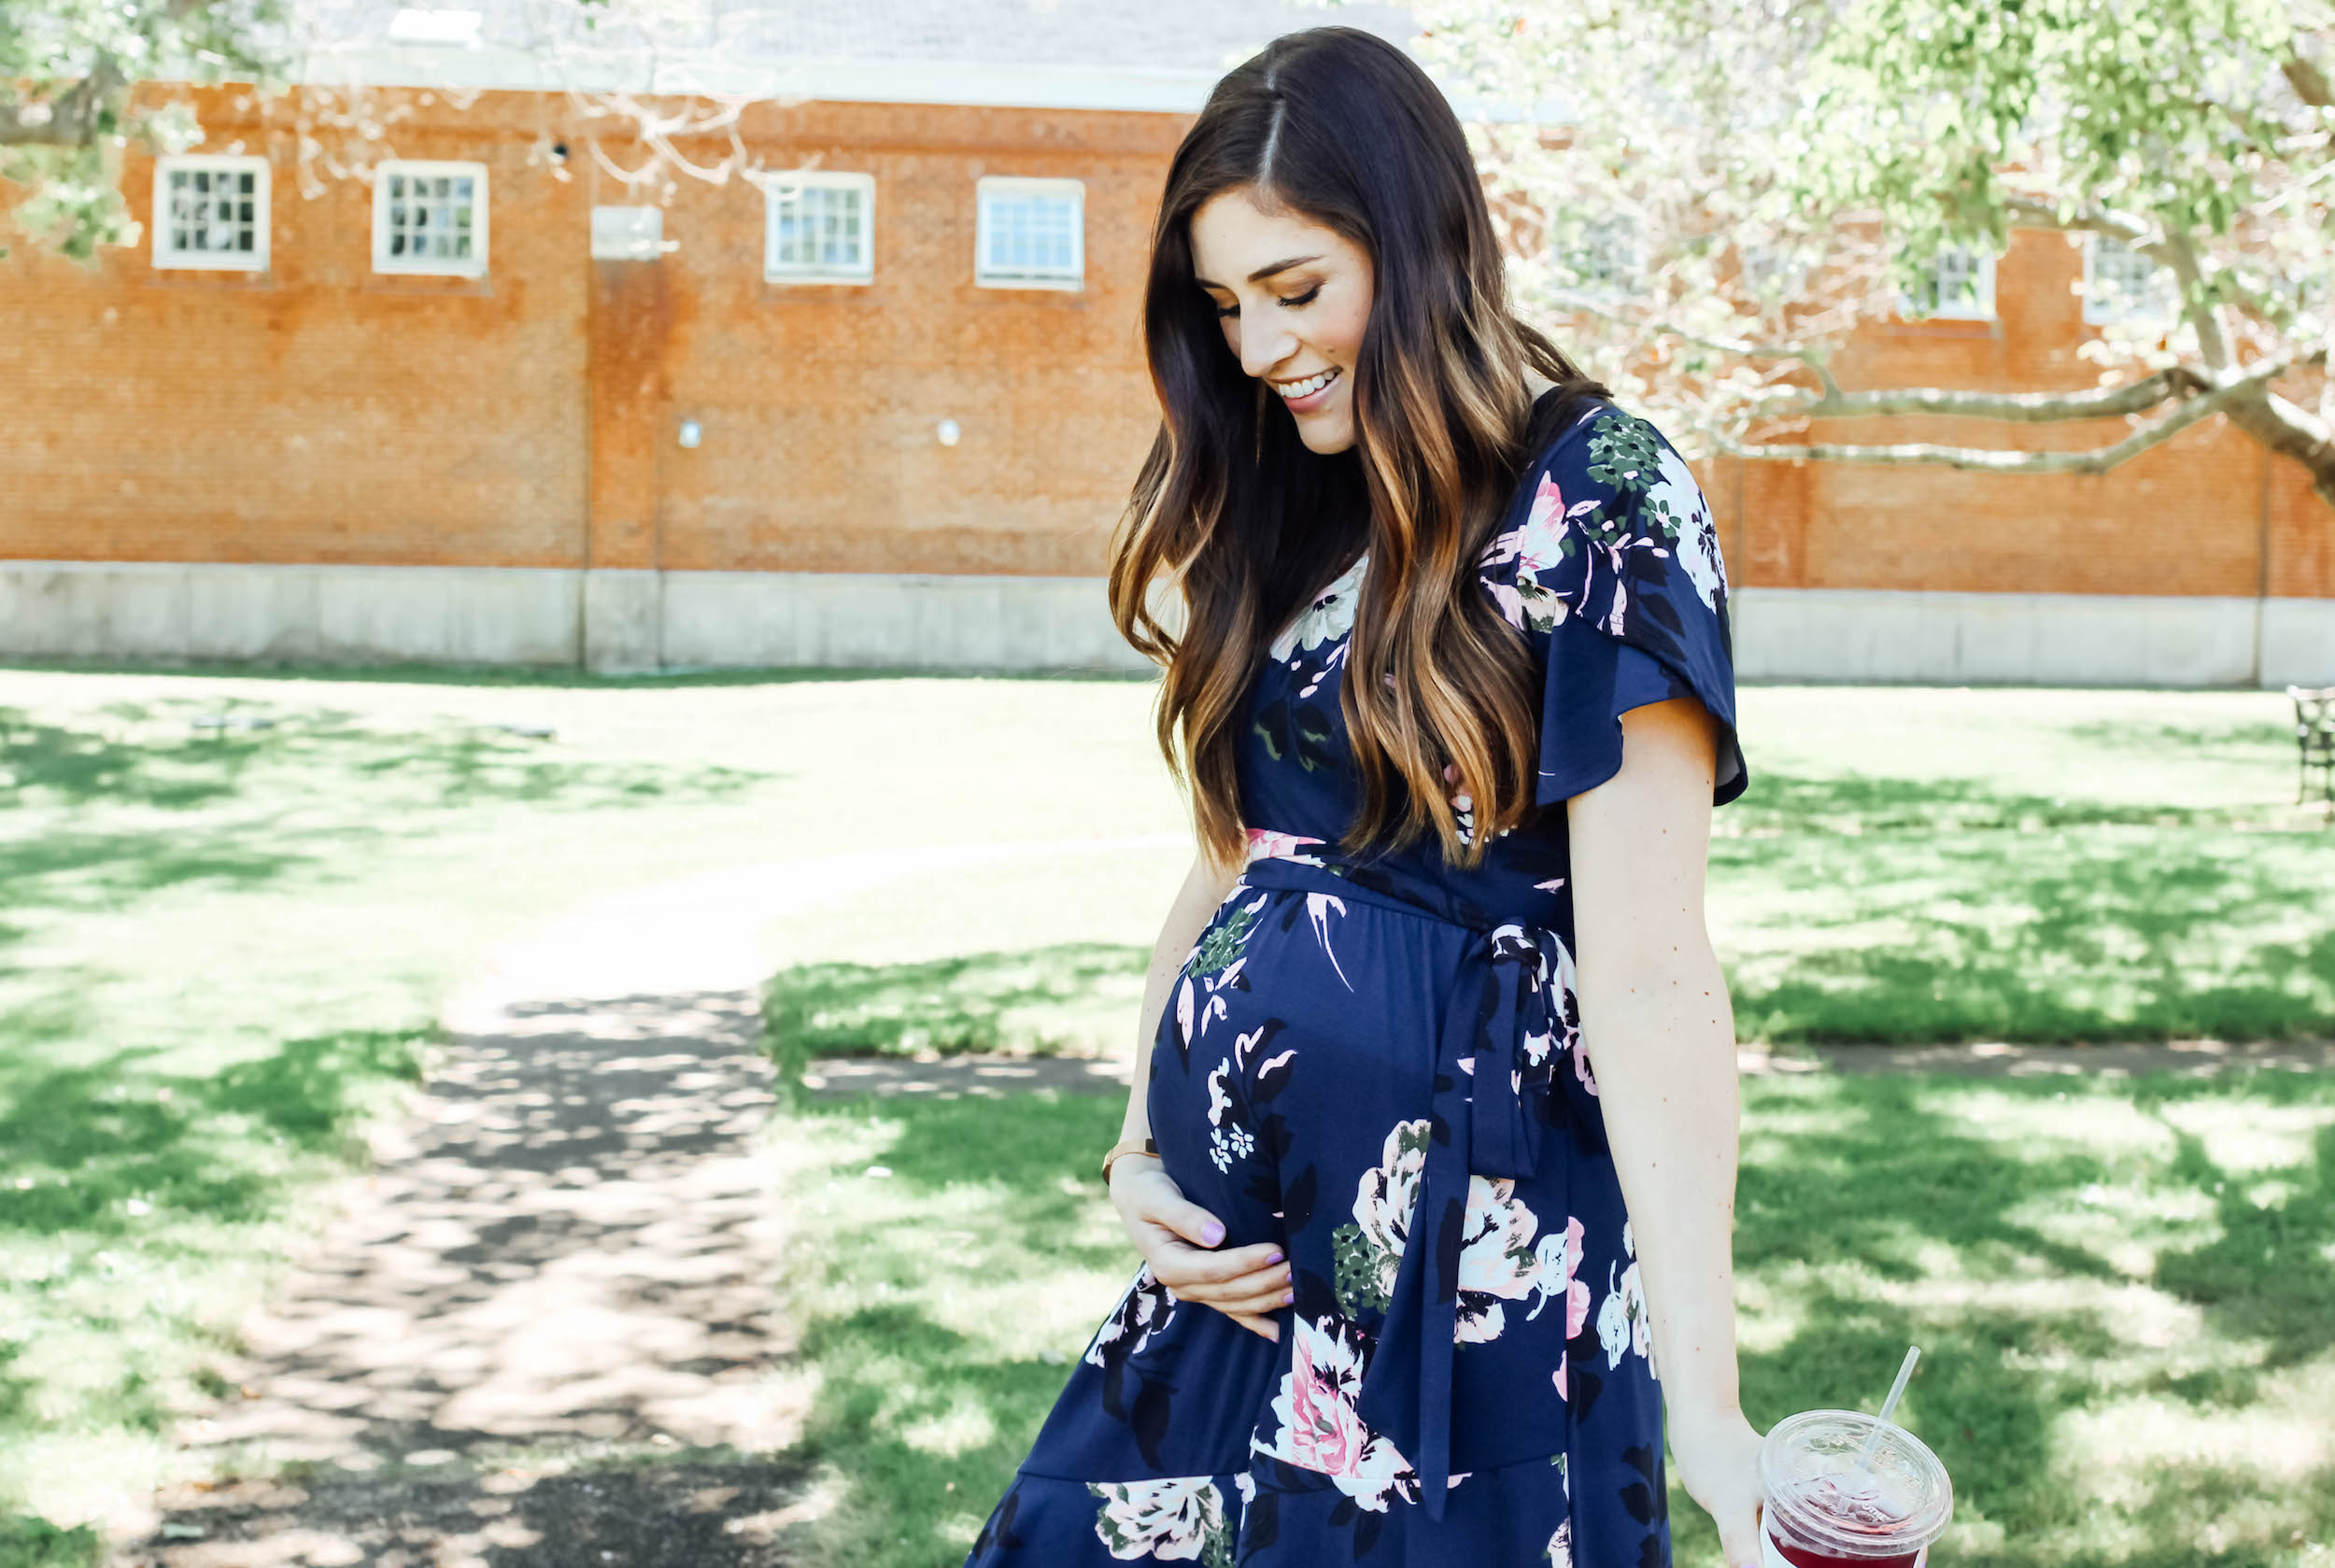 Maternity Style | 5 Things It's Completely OK To Feel During Pregnancy